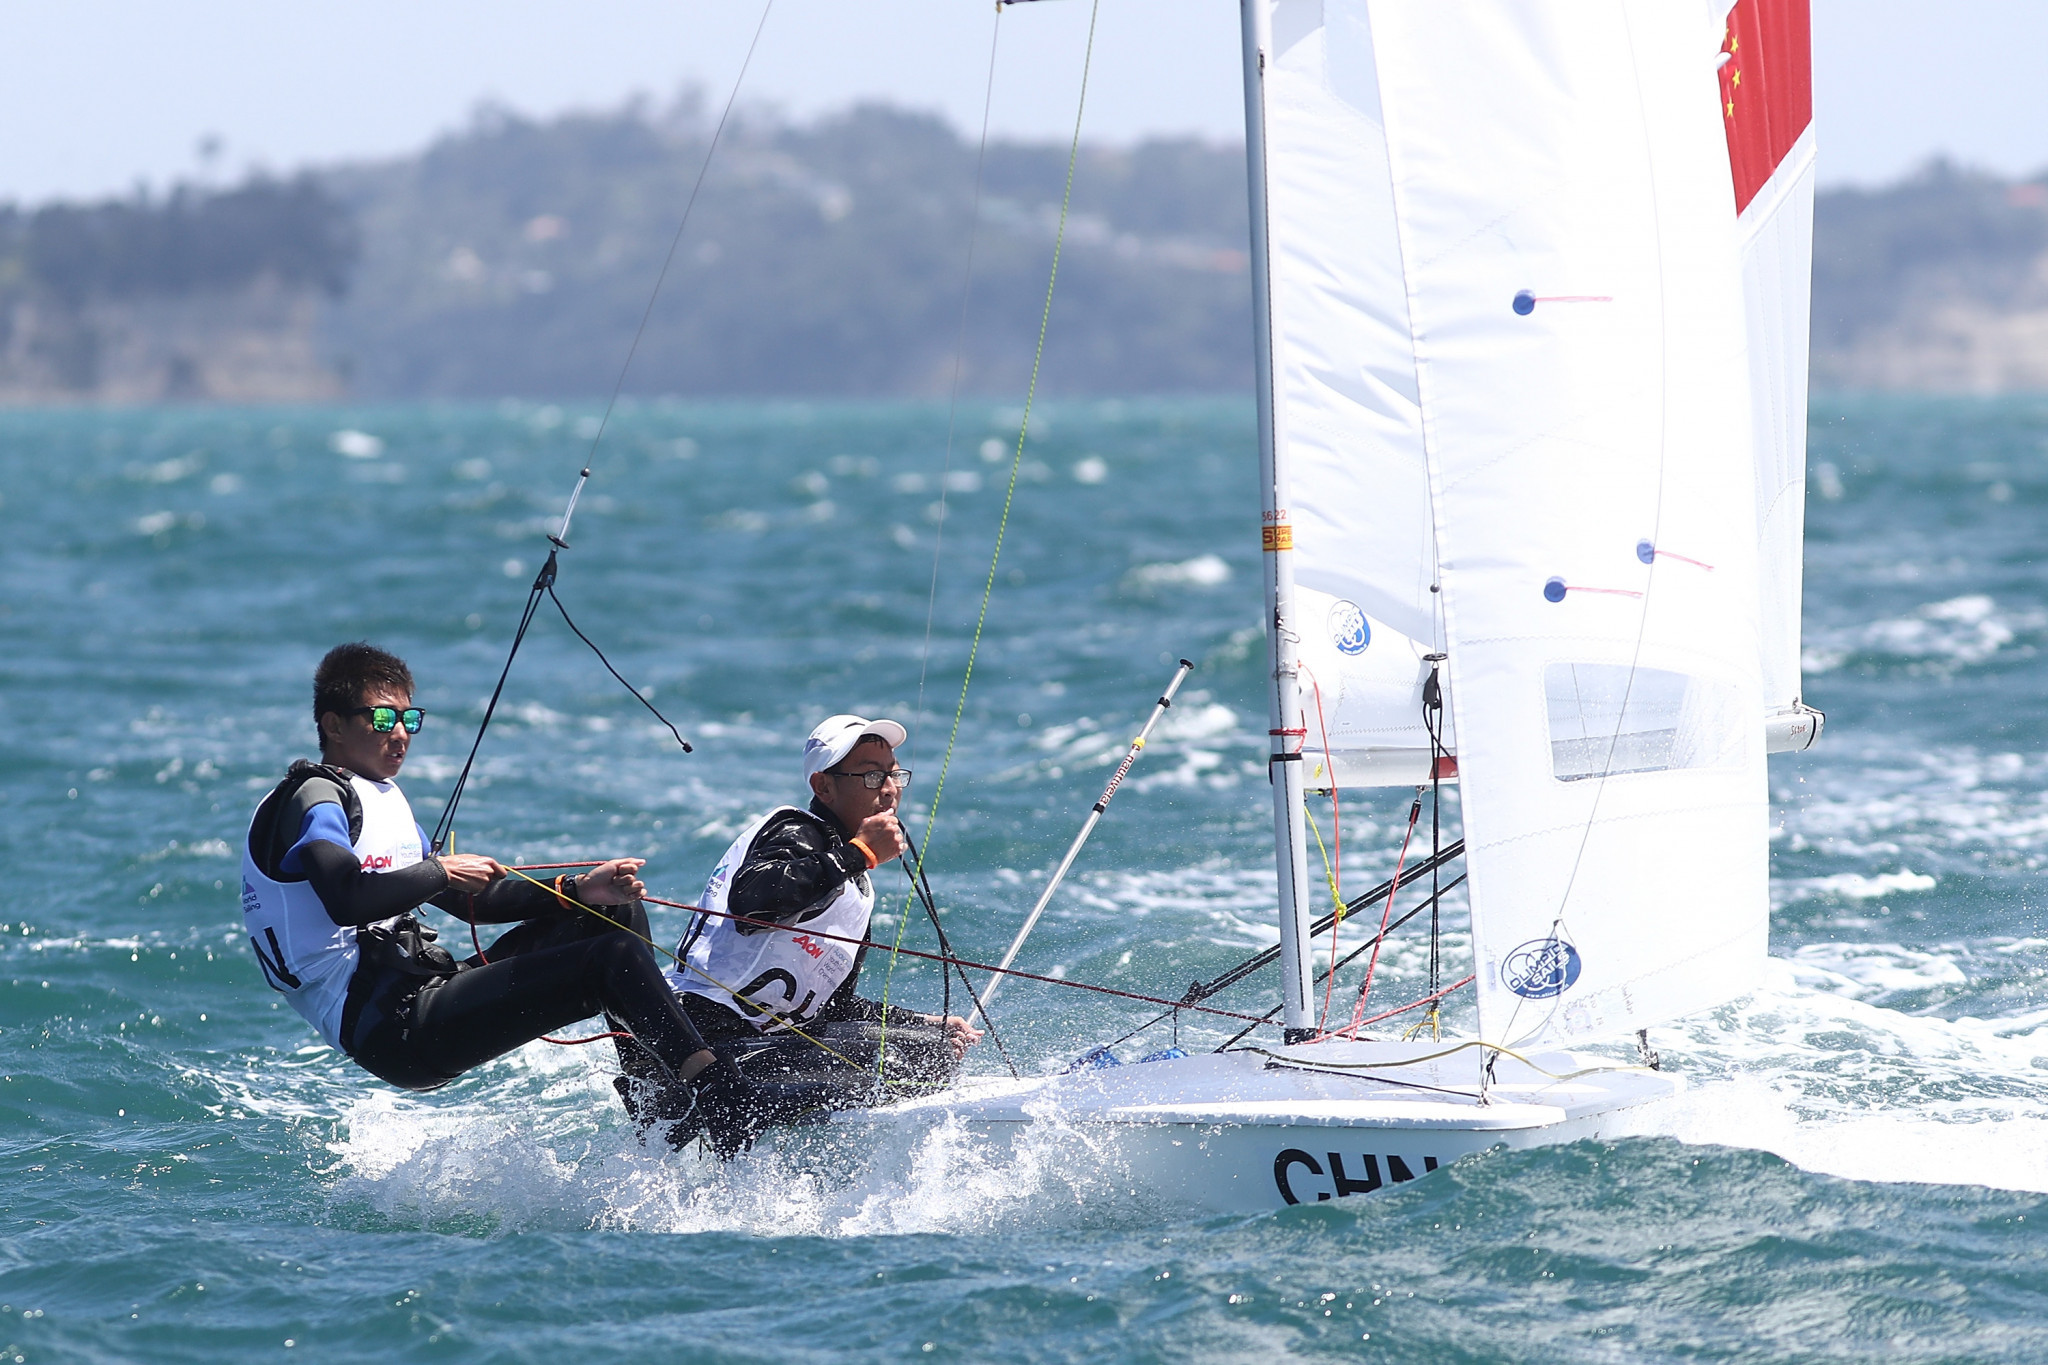 World Sailing open bidding for 2021 and 2022 Youth Sailing World Championships